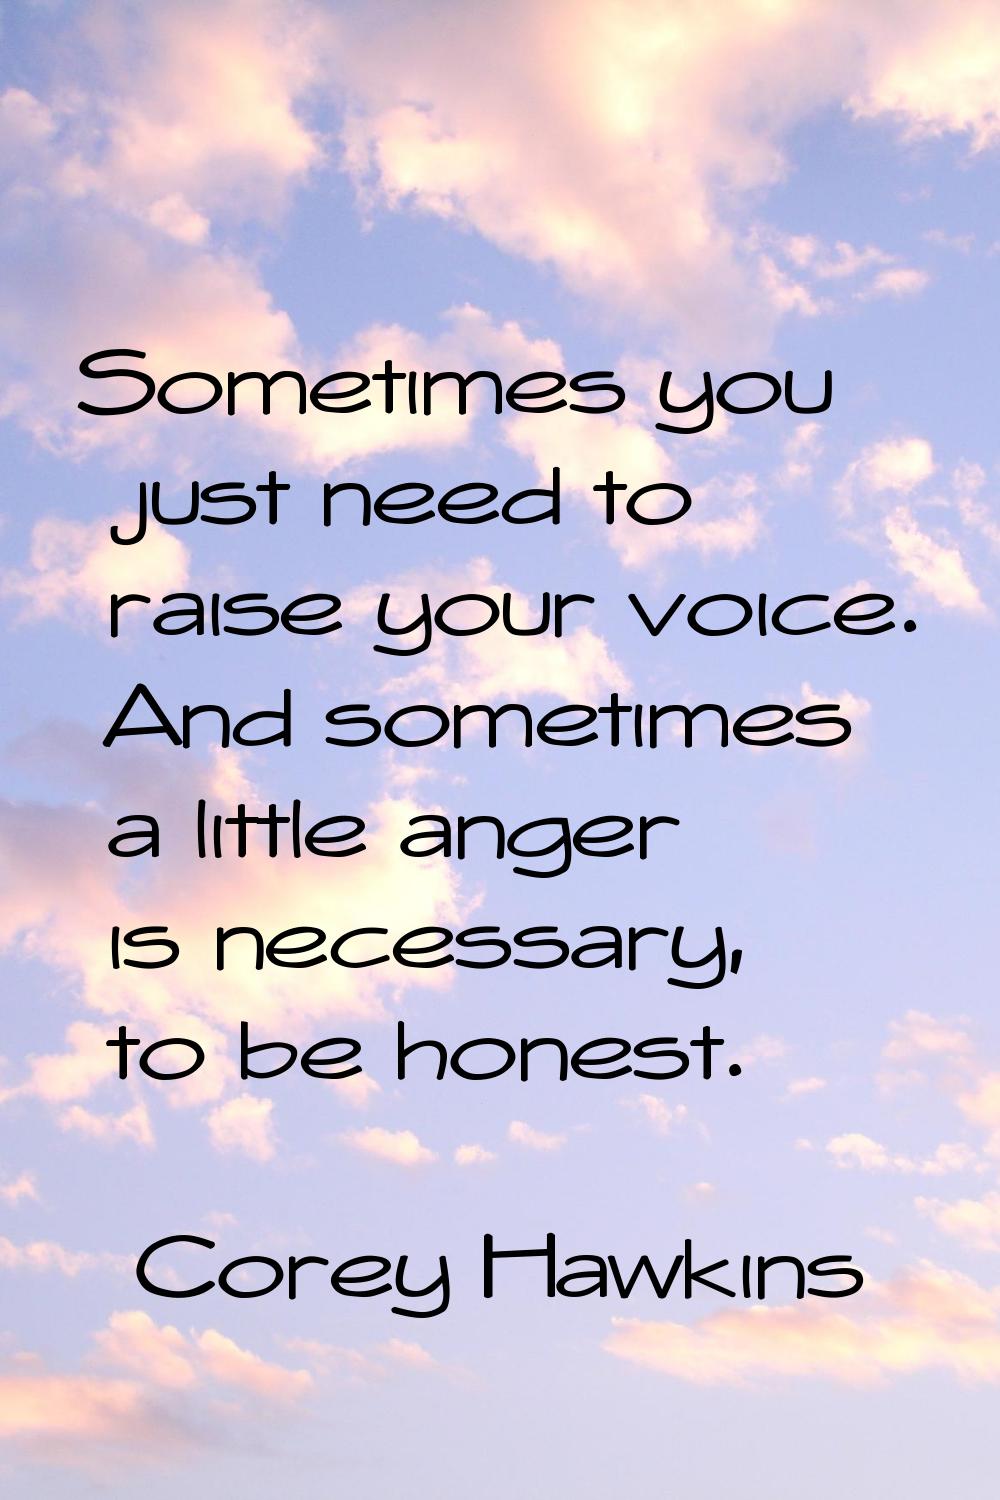 Sometimes you just need to raise your voice. And sometimes a little anger is necessary, to be hones